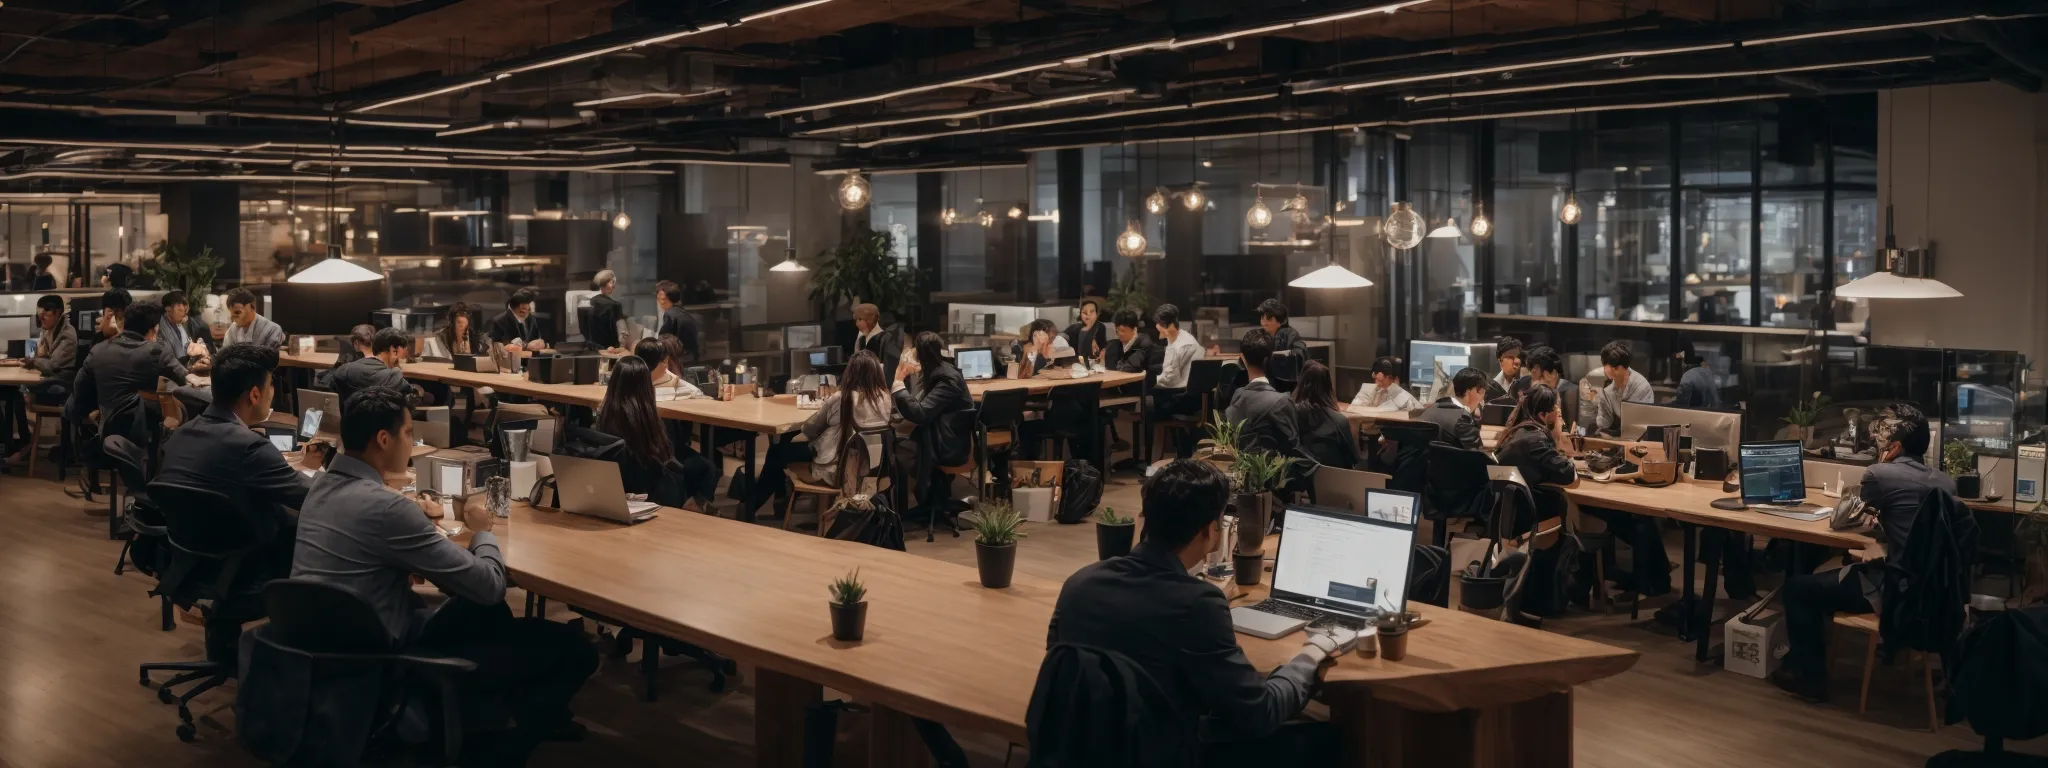 a bustling open-plan wework office space with entrepreneurs collaboratively working around a large table.